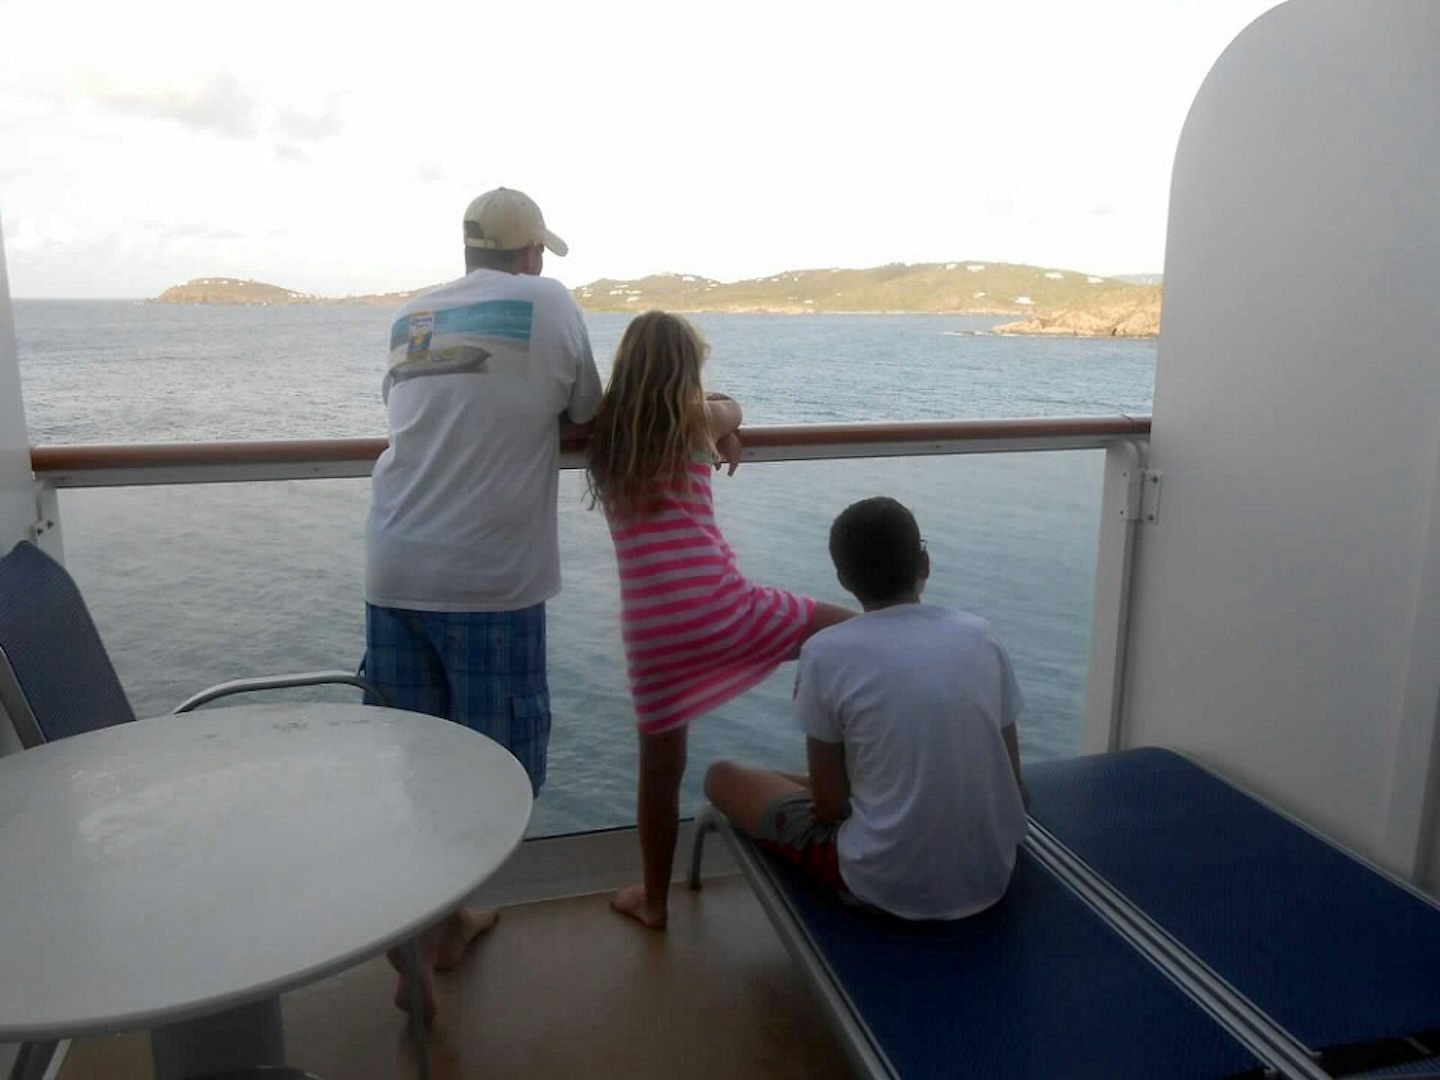 Sailing into St. Thomas, enjoying our large balcony to take in the sights.